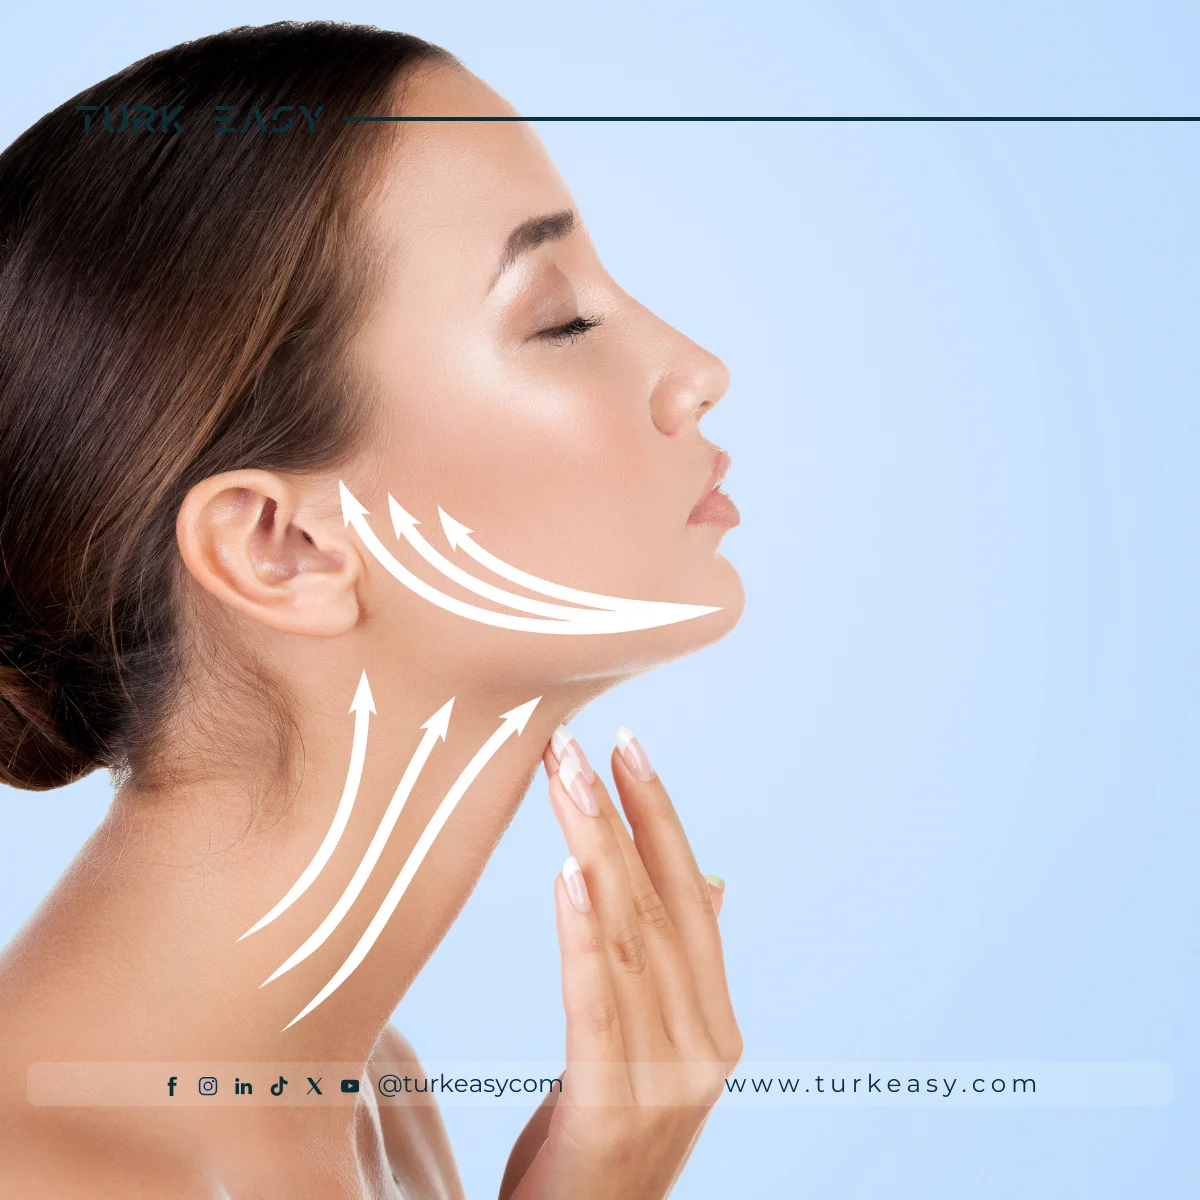 Spider Web Facelift - Revitalize Your Appearance